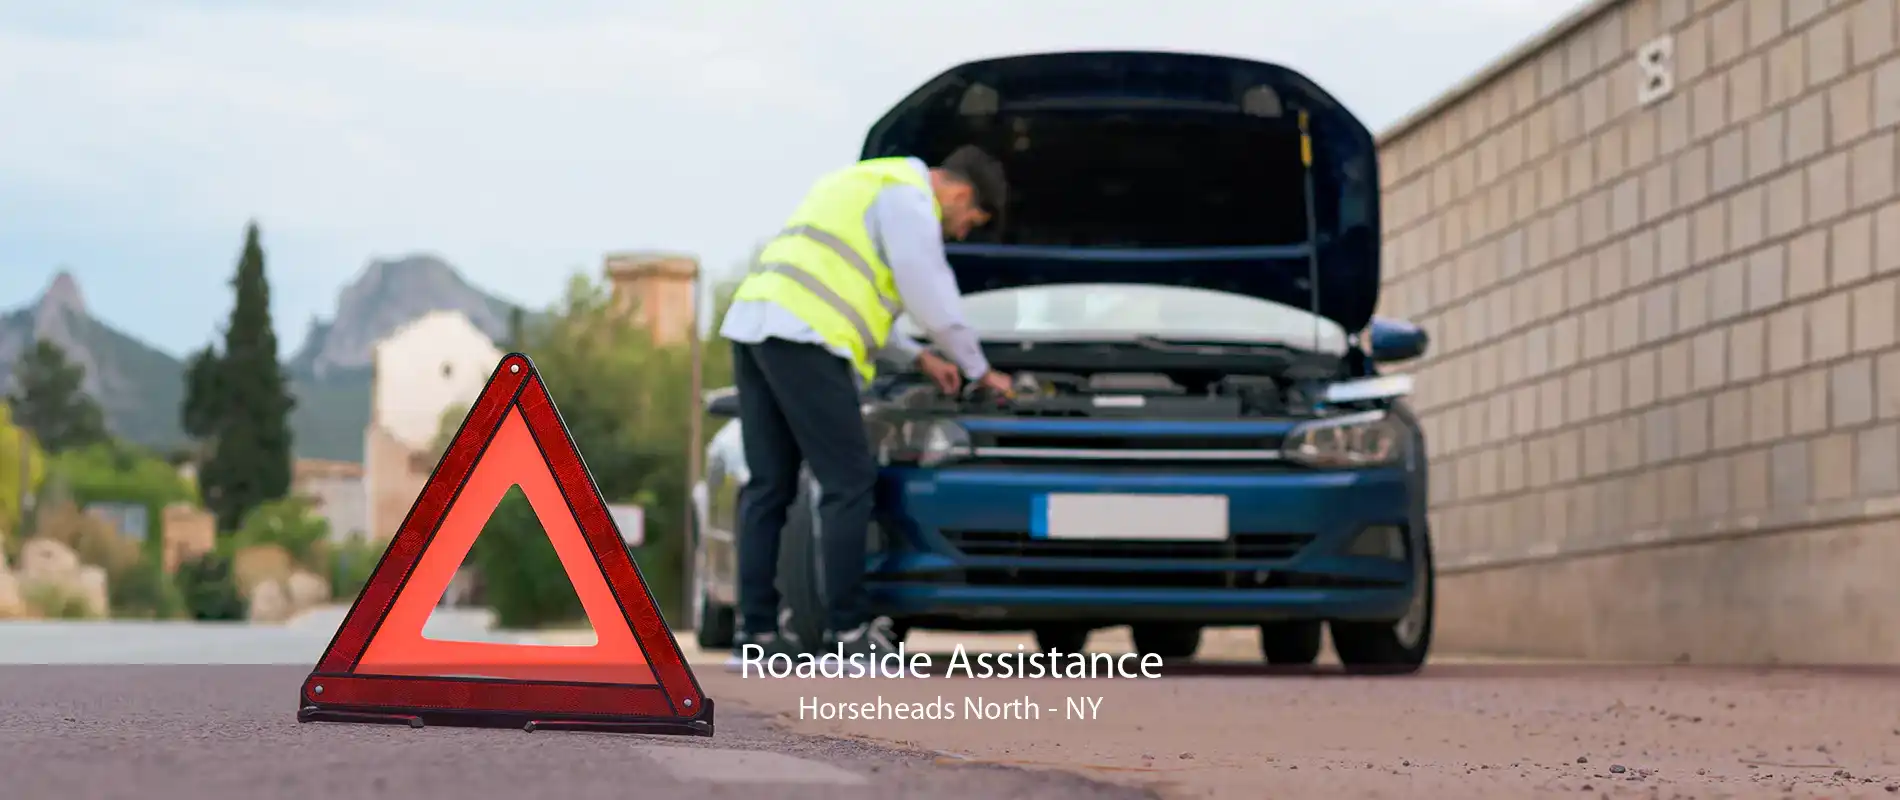 Roadside Assistance Horseheads North - NY